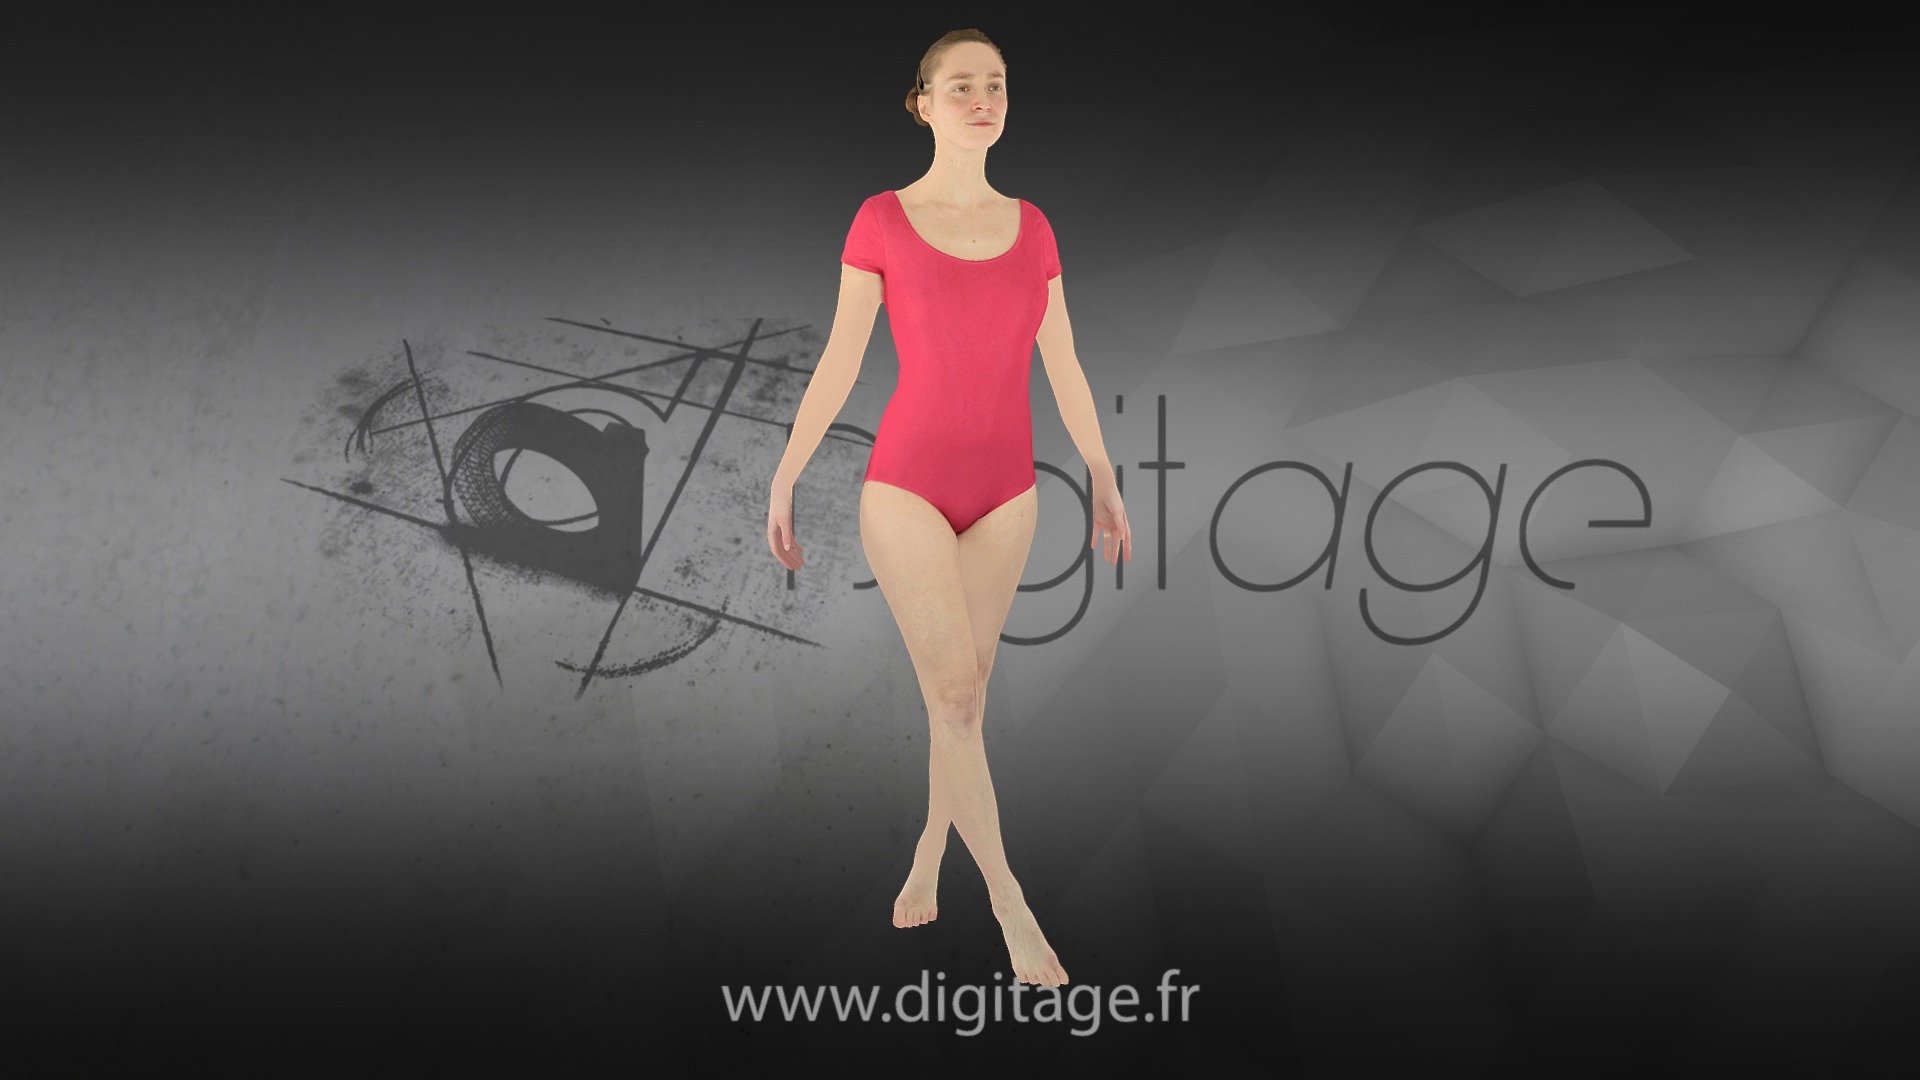 Bodysan ready for import in 3D scenes for pose reference and study. 
Textures 8k : - diffuse 
Woman in underwear

Reffile : 300__fin_New - Roxane - standing in pink body - Buy Royalty Free 3D model by Digitage 3d model